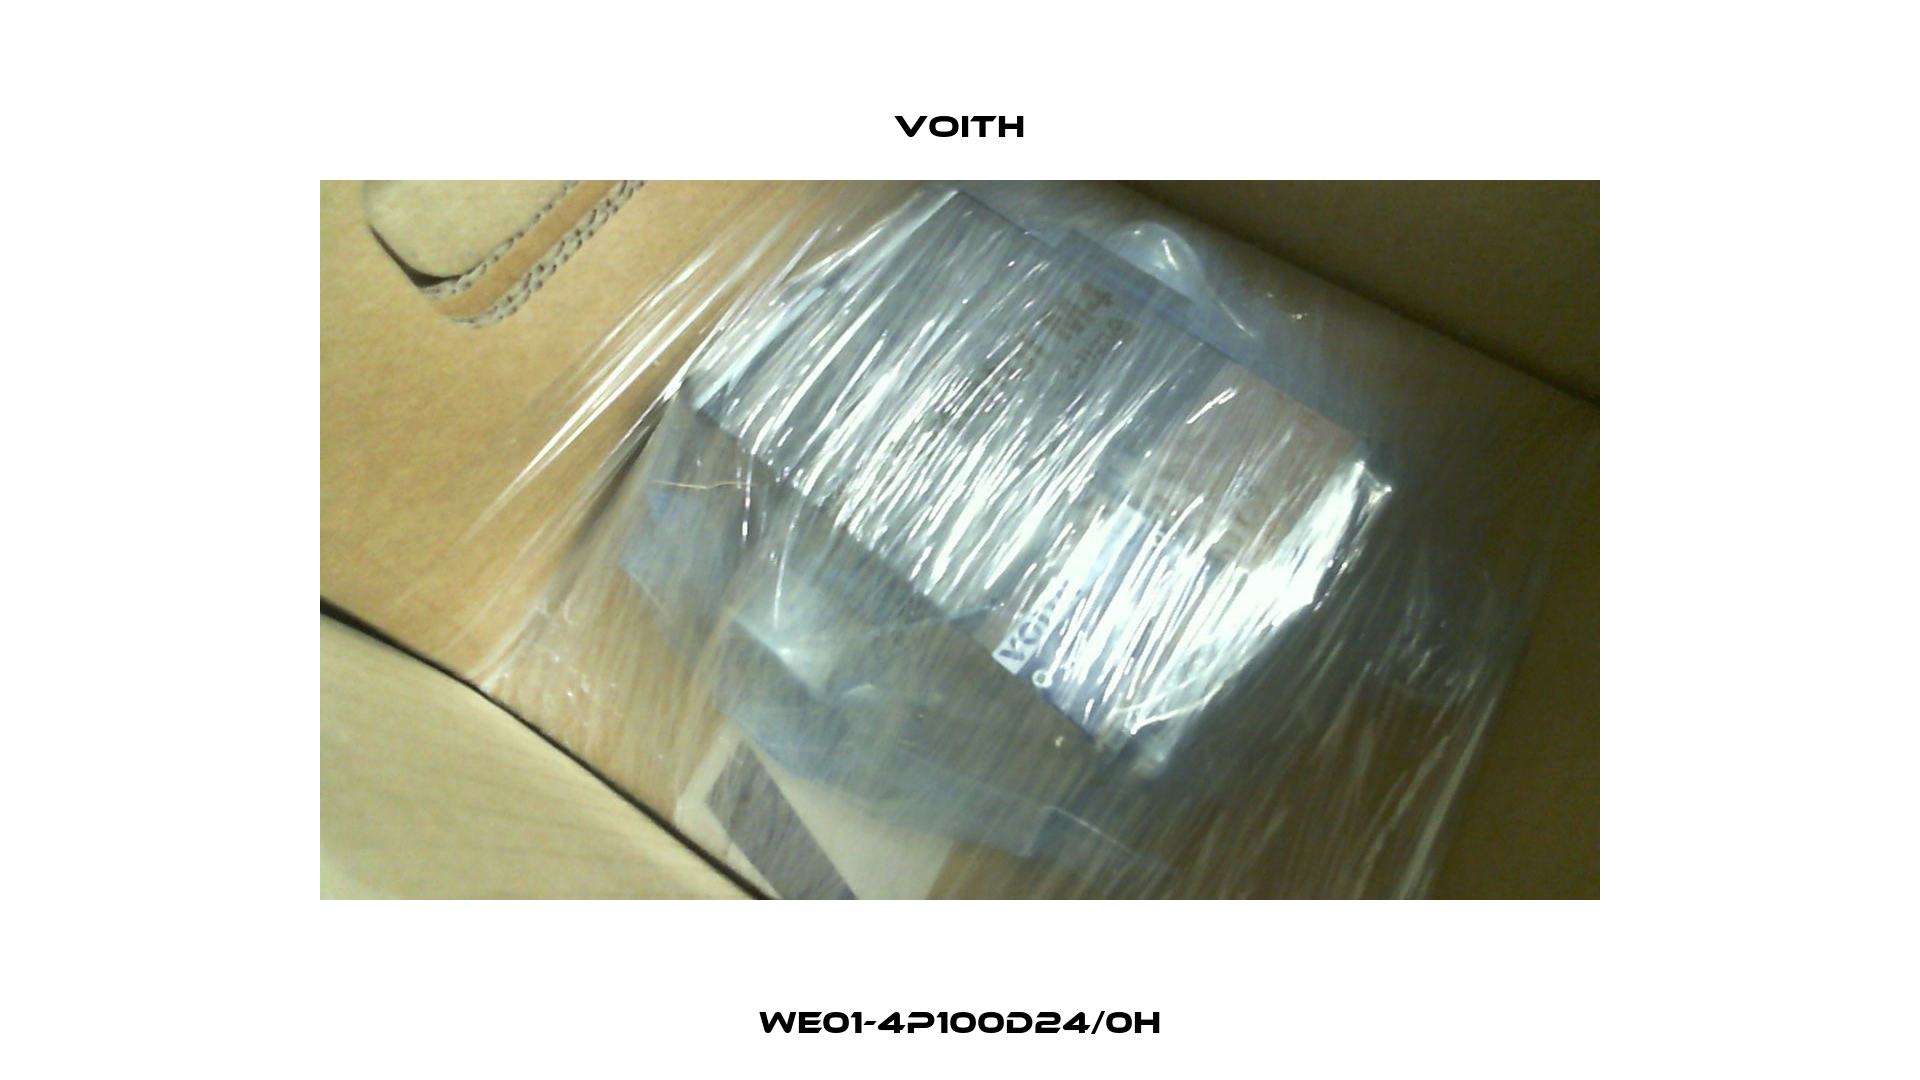 WE01-4P100D24/0H Voith